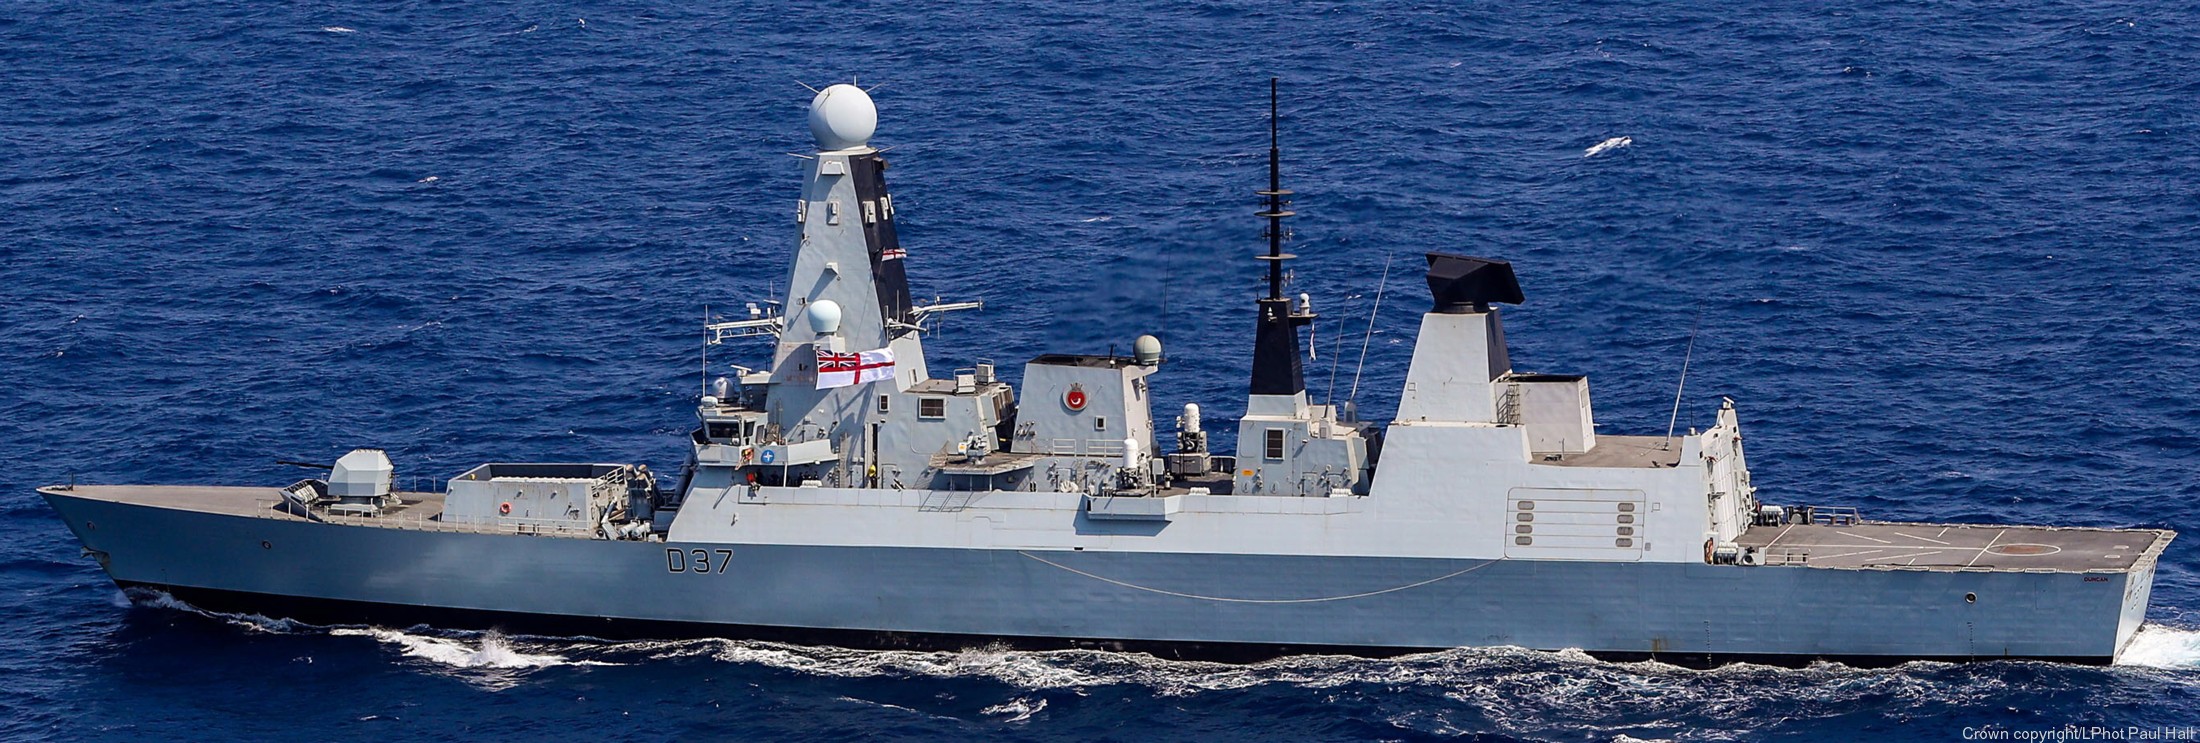 d37 hms duncan d-37 type 45 daring class guided missile destroyer ddg royal navy sea viper 56